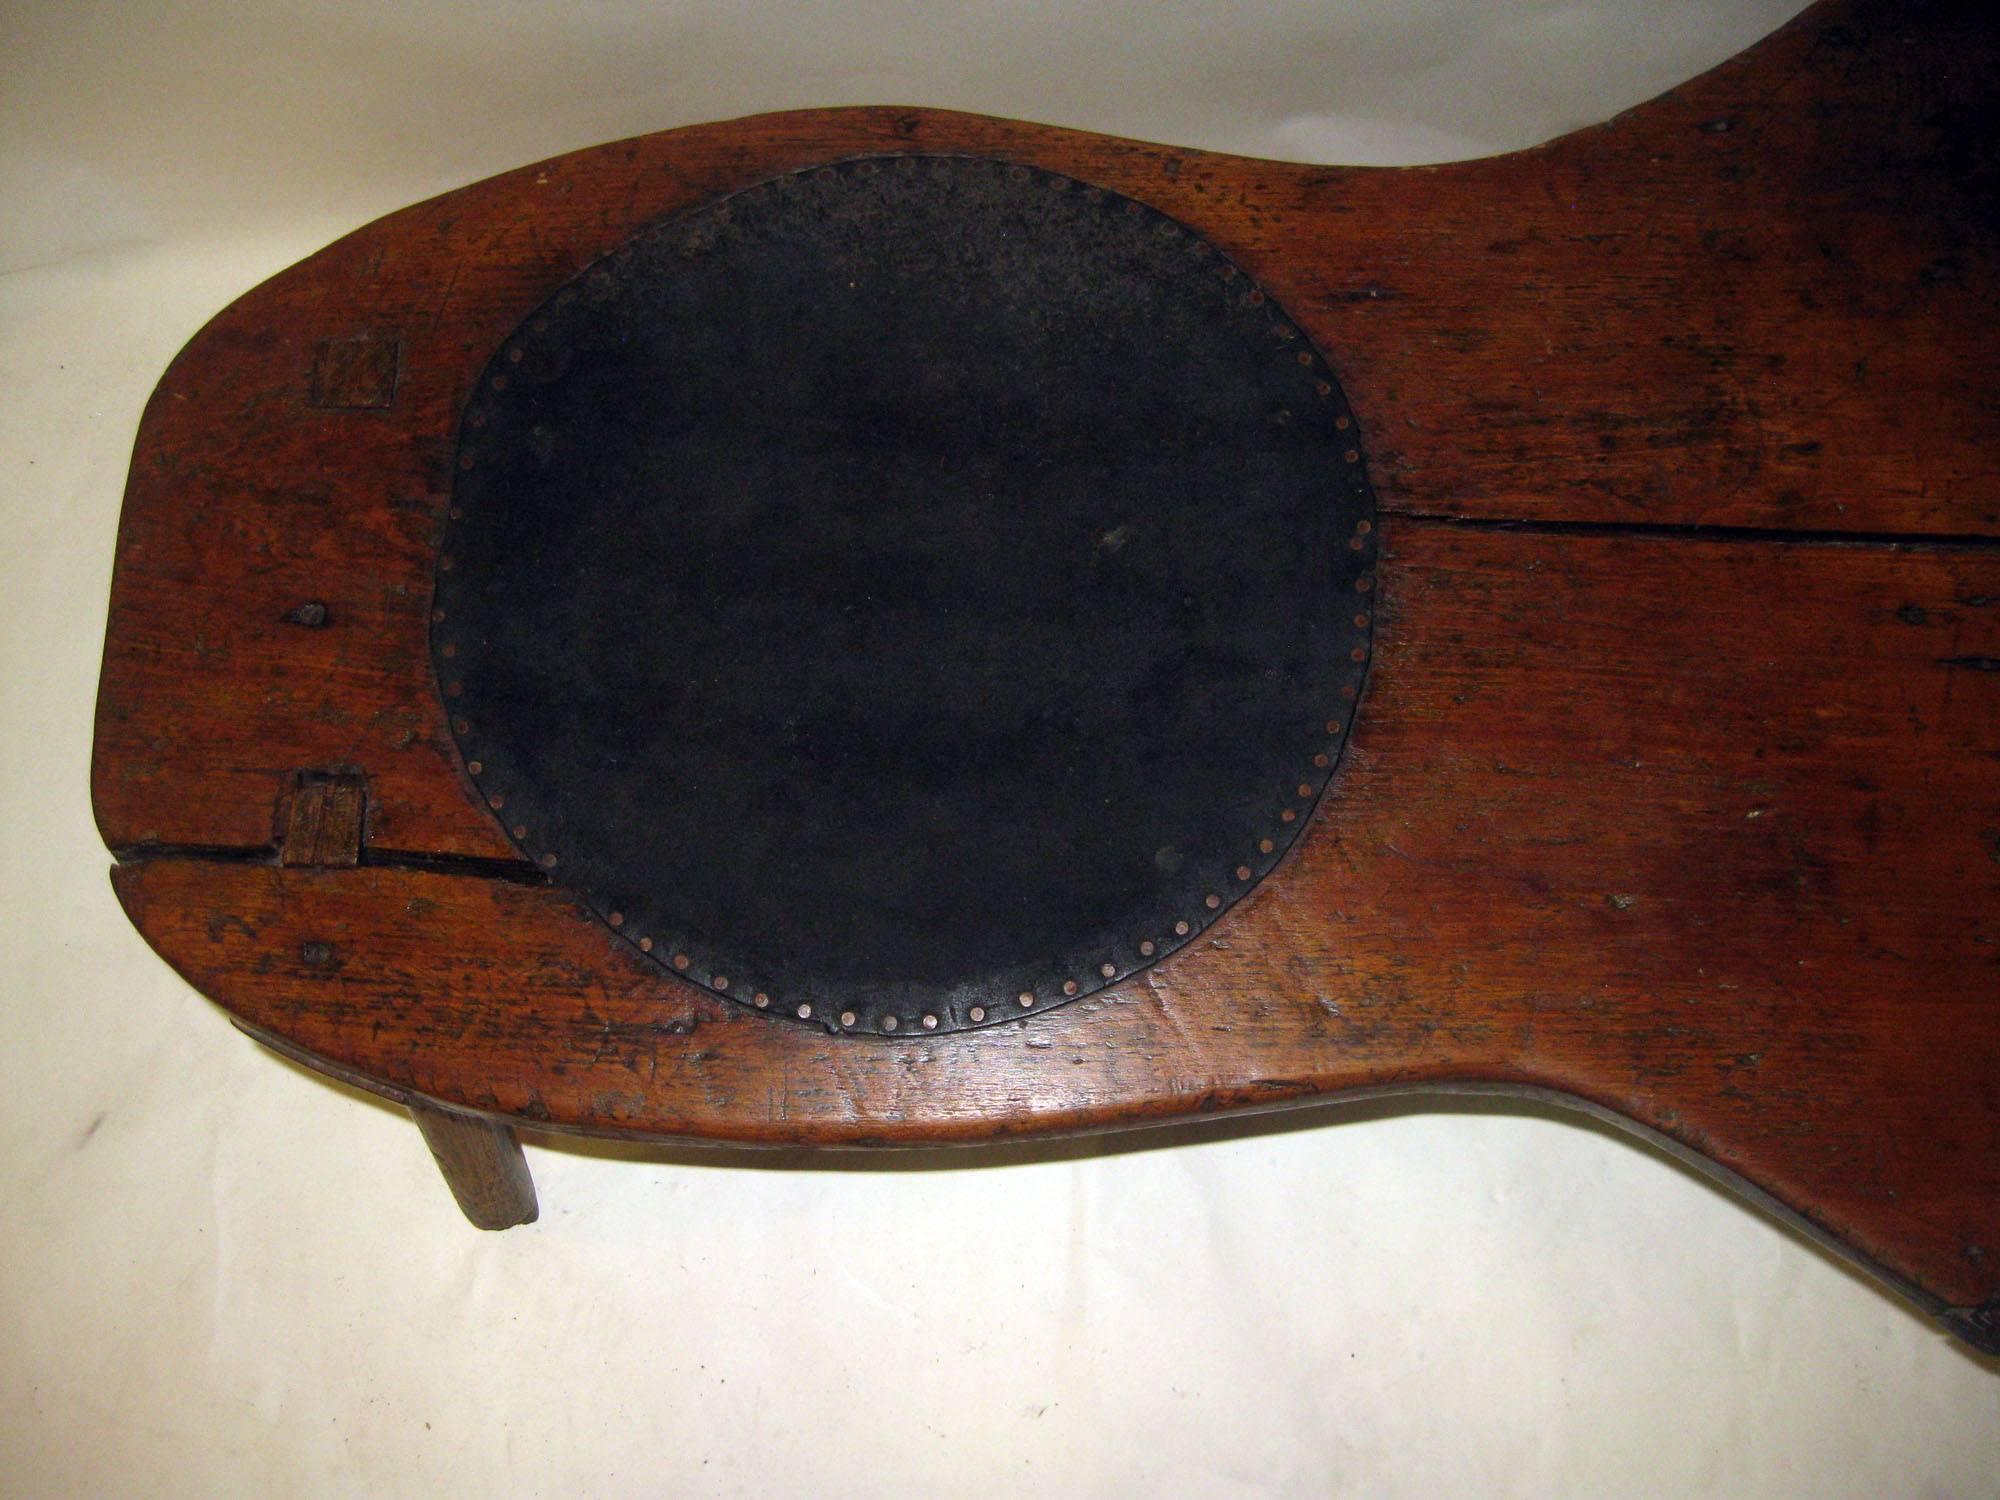 A great addition to any Folk Art or Americana collection, this cobbler’s bench is in "as found" condition and retains its original worn surface. It is constructed of maple with oak doweled legs and a seat of rawhide, which has probably